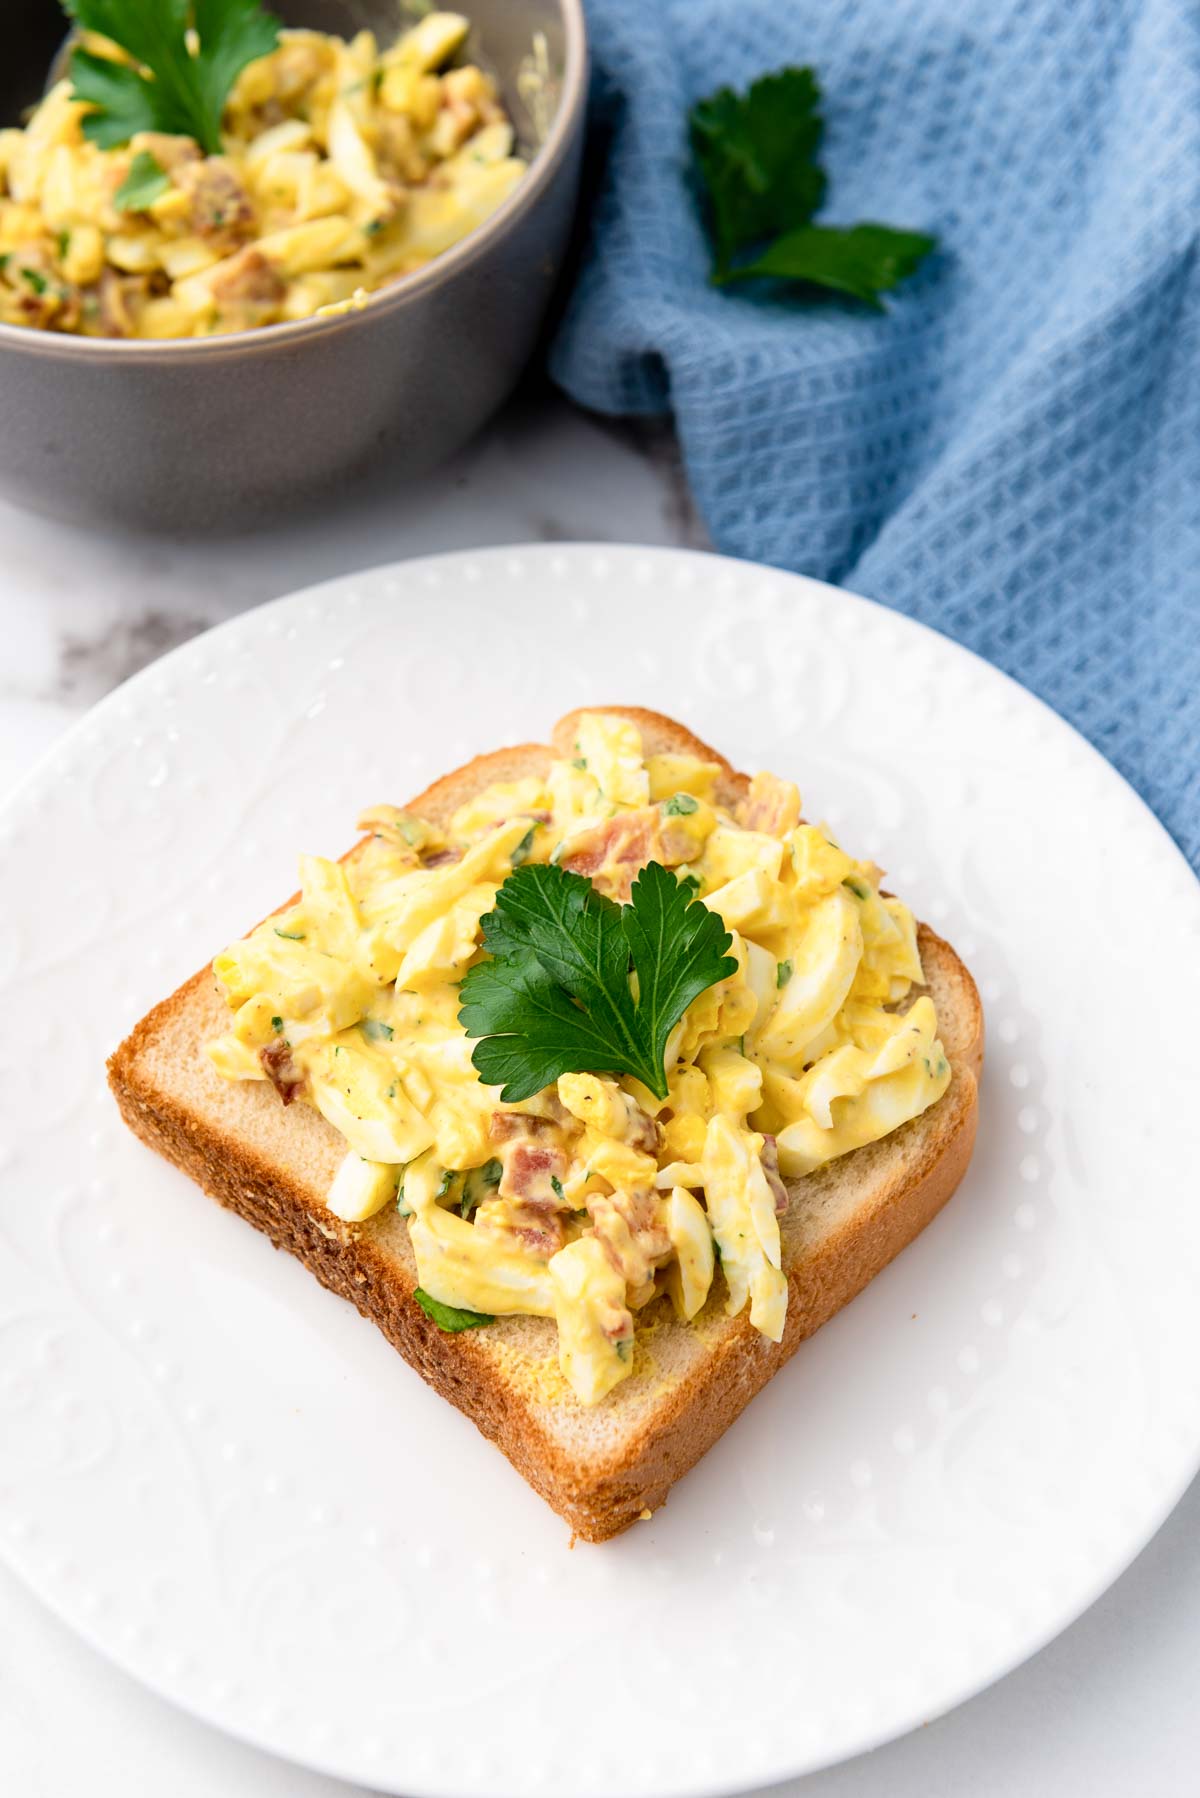 egg salad on a piece of white bread with parsley.